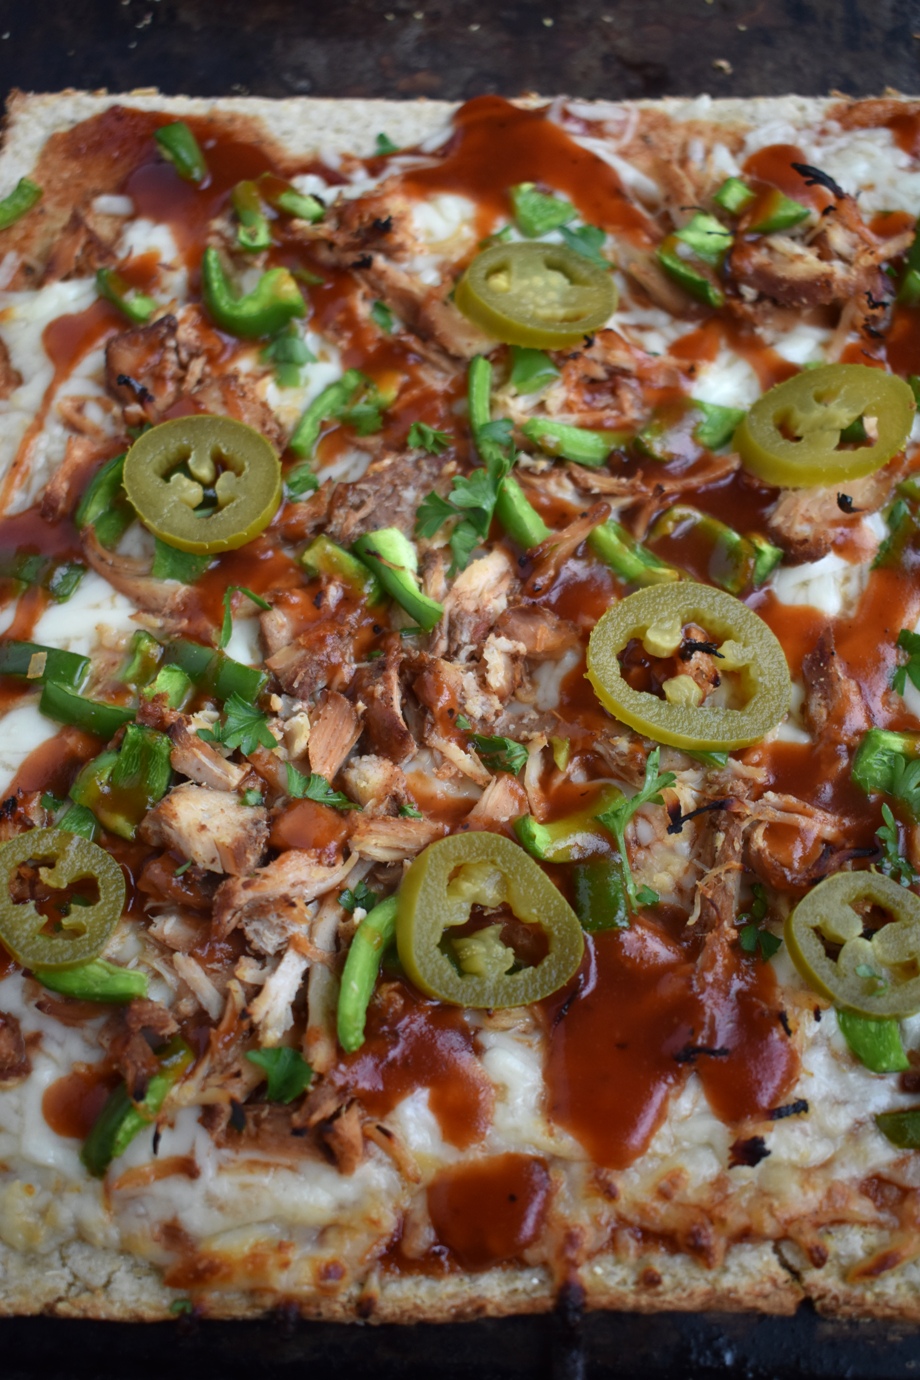  BBQ Chicken Pizza with Cauliflower Crust is nutritious with an 80% cauliflower crust and is topped with shredded chicken, BBQ sauce, mozzarella cheese, bell peppers and jalapenos! www.nutritionistreviews.com #pizza #bbq #cauliflower #healthier #dinner